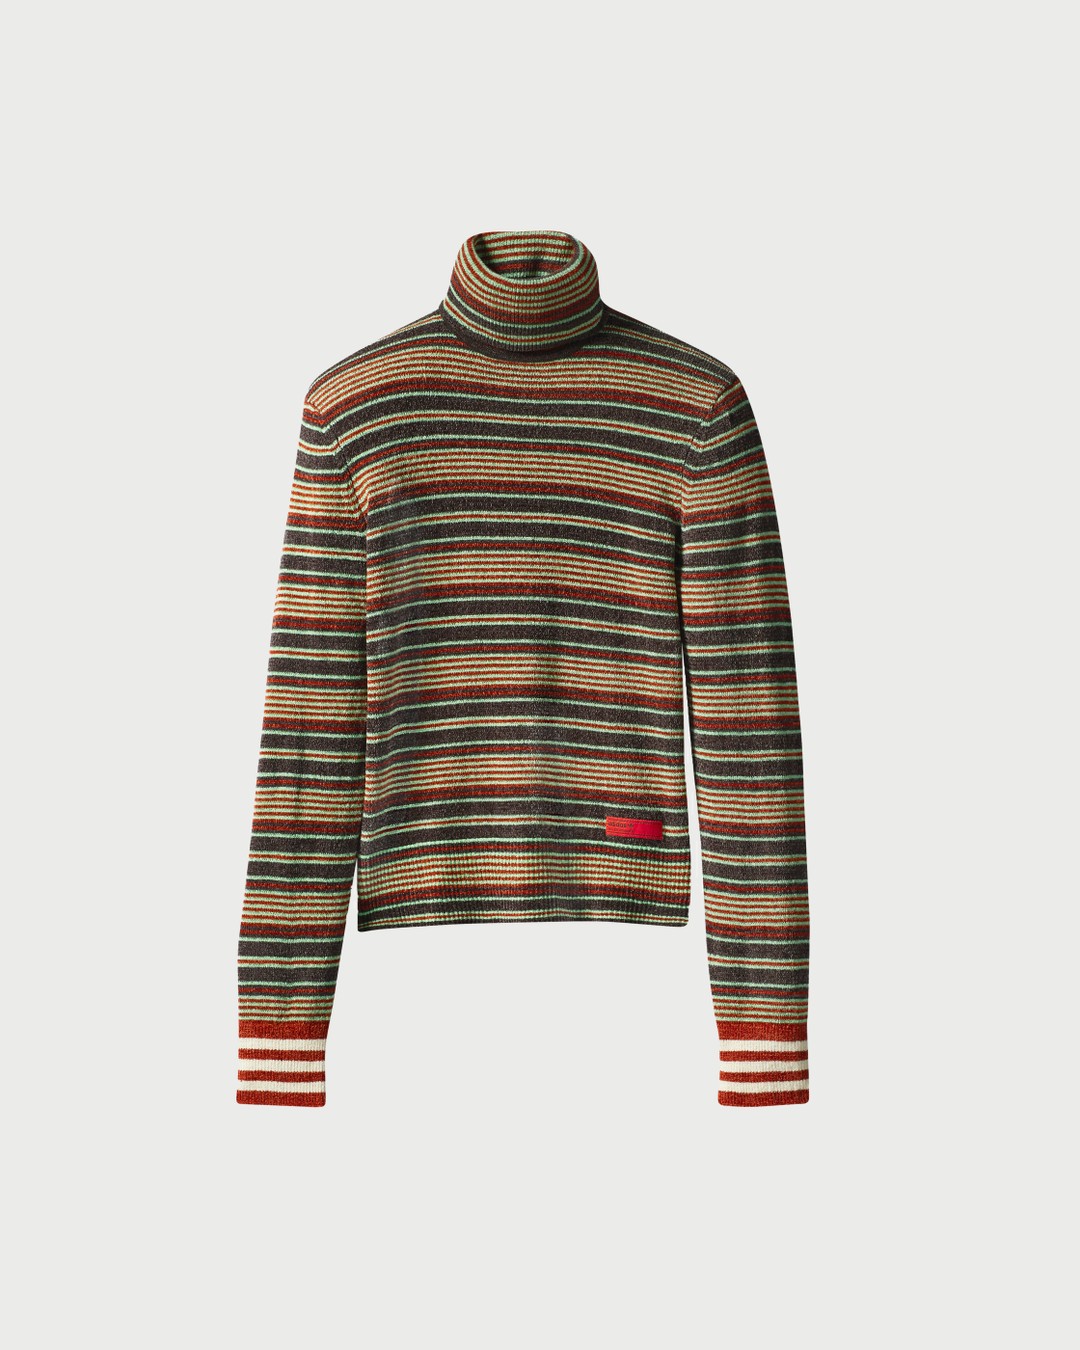 Adidas x Wales Bonner – Roll Neck Multi - Outerwear - Multi - Image 1